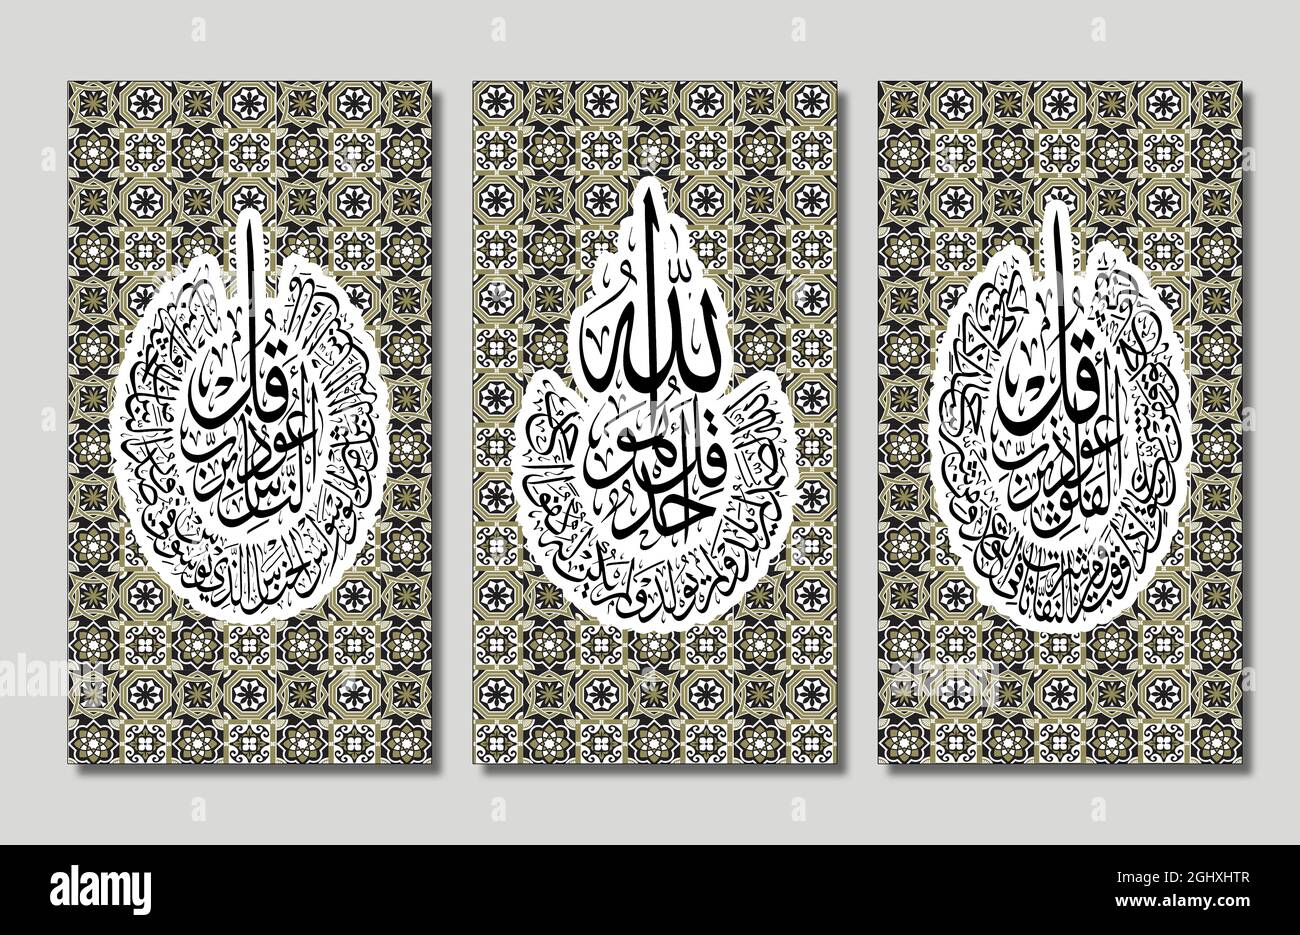 Islamic wall art . 3 pieces of frames in pattern motifs mandala colored  background with golden islamic verse Stock Photo - Alamy